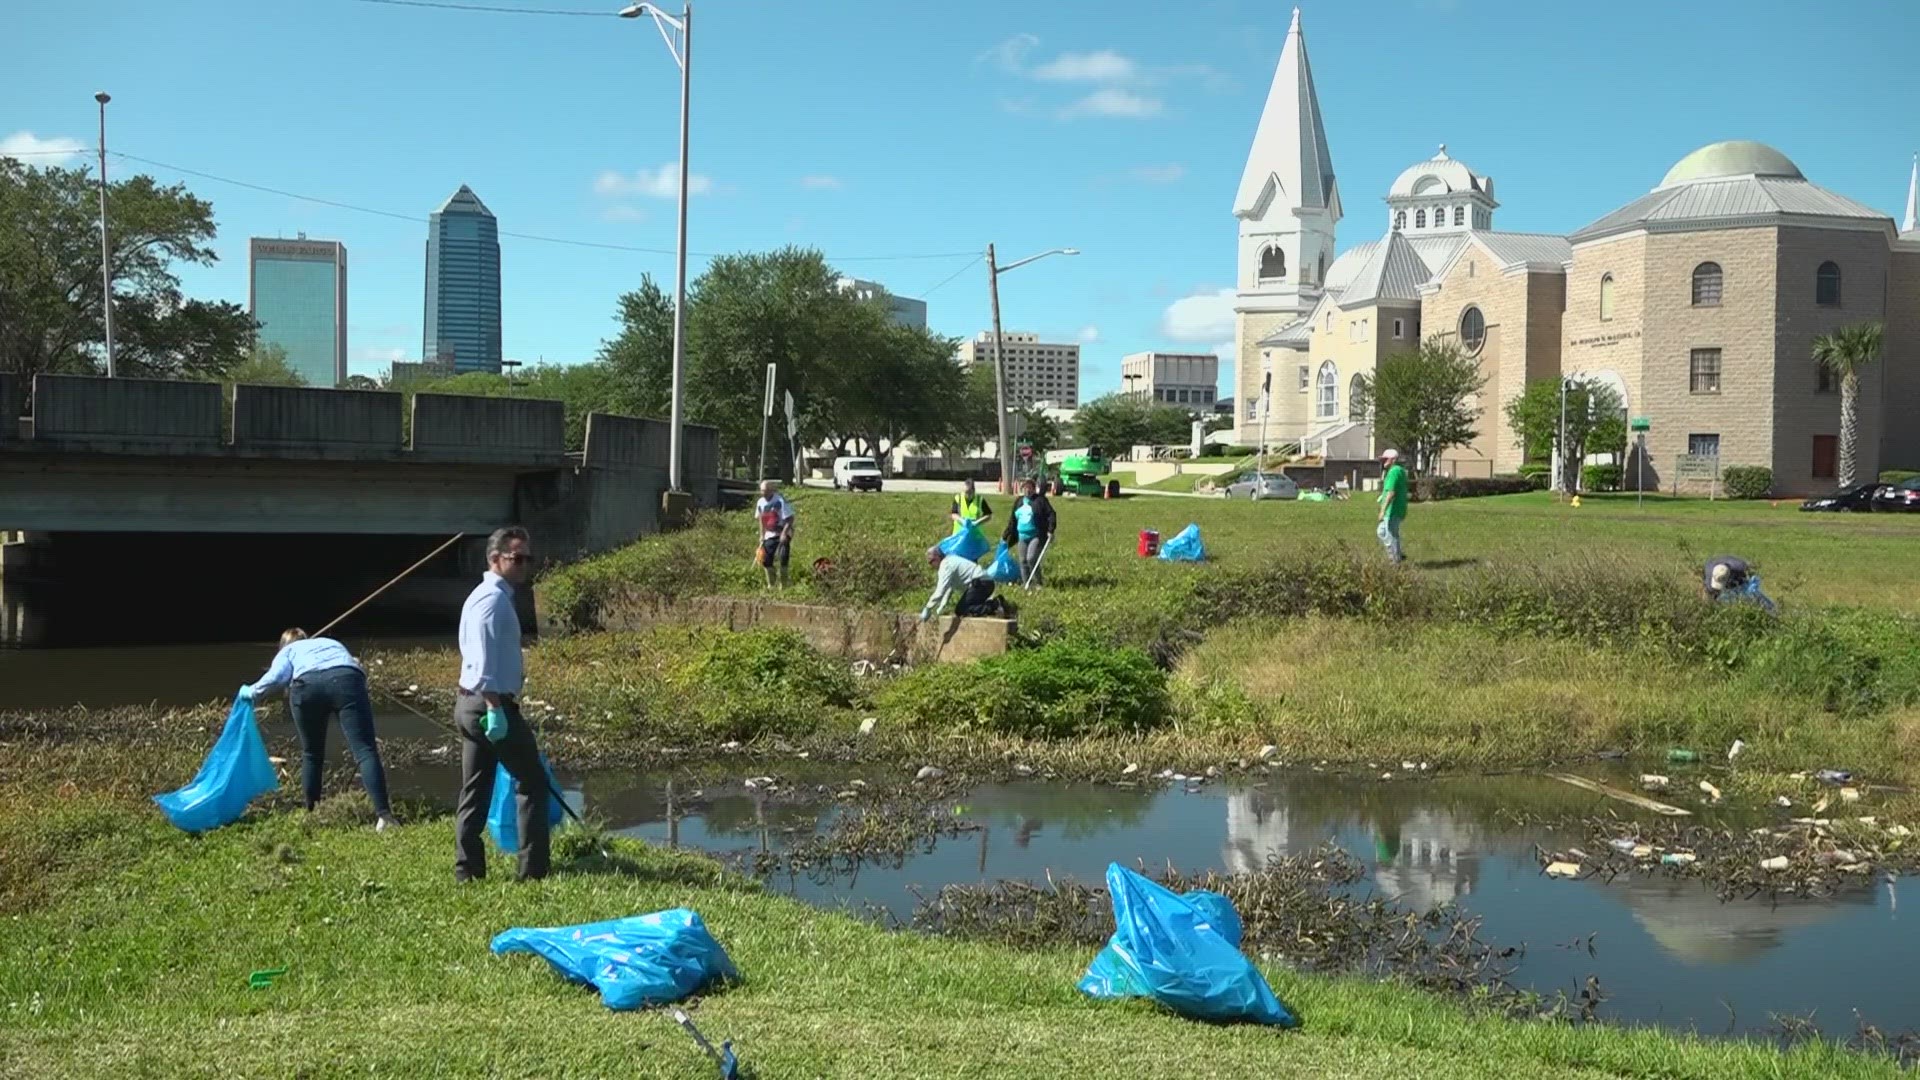 City leaders including Mayor Donna Deegan got their hands dirty while cleaning up trash in the Hogans Creek area.